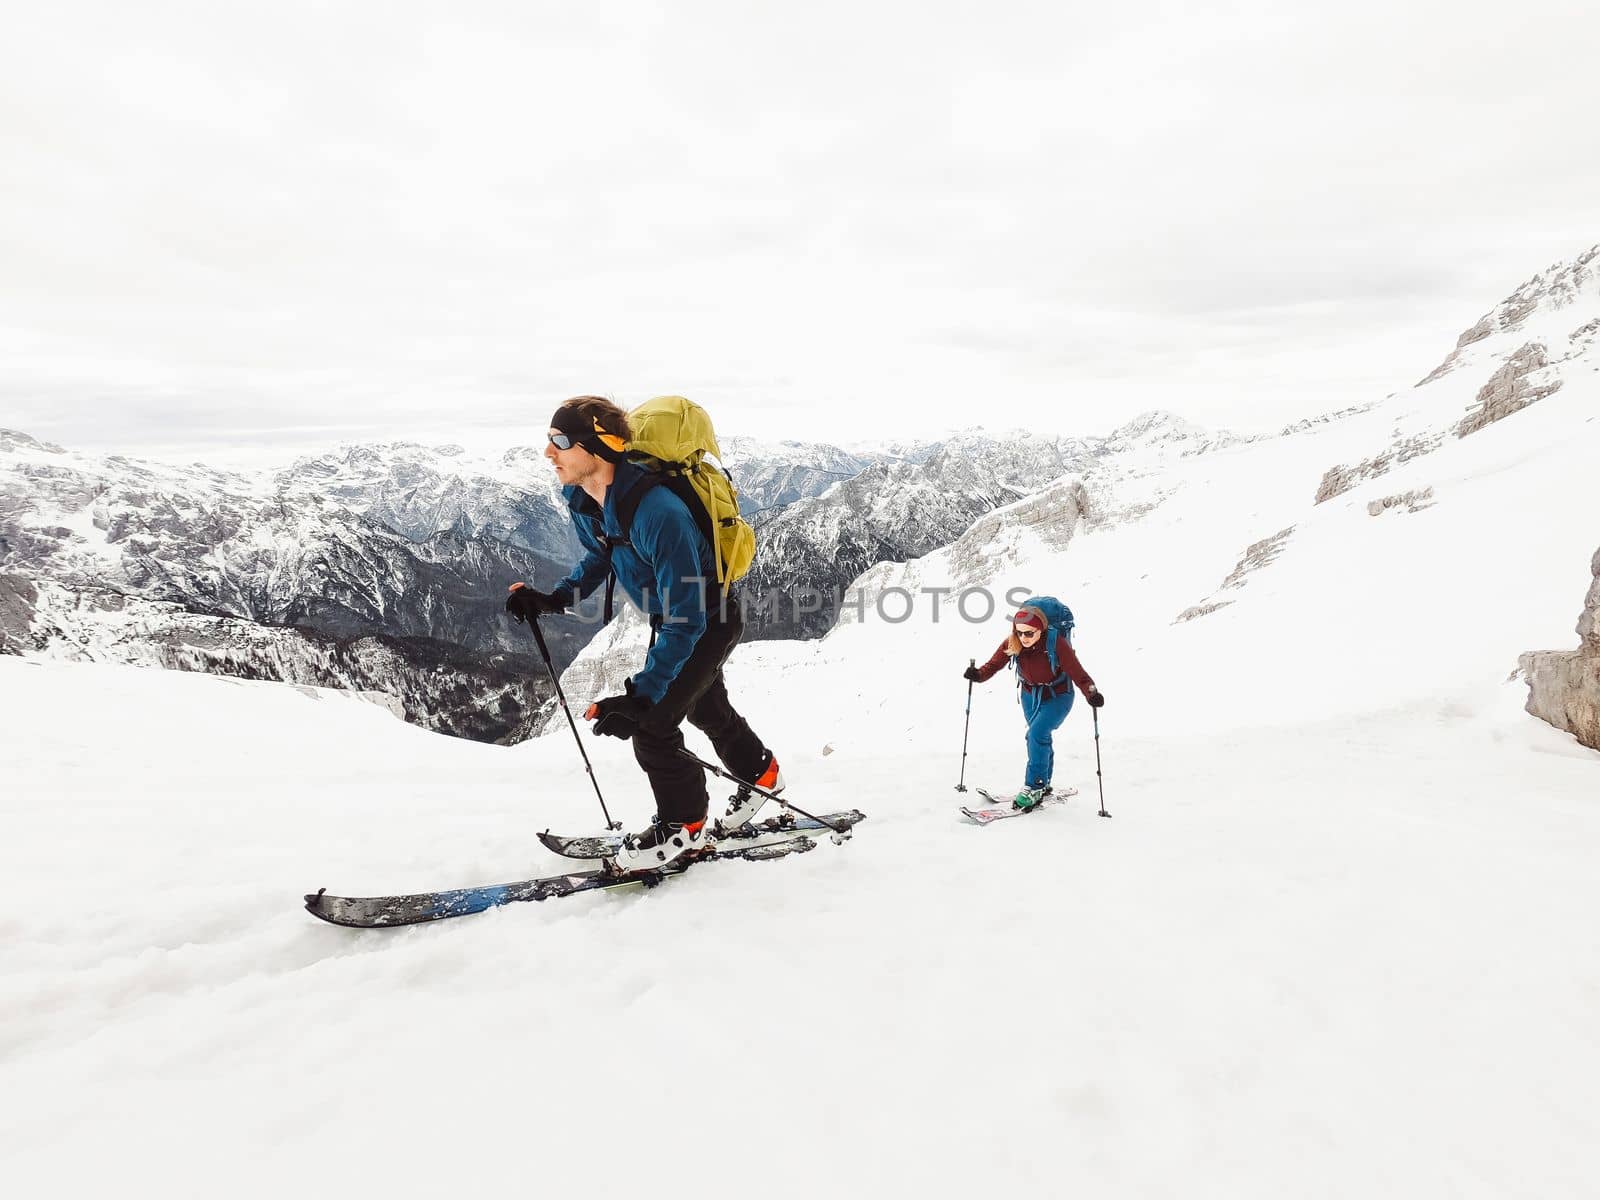 Adventurous couple ski touring high up in the snowy Alps on a beautiful winter day by VisualProductions